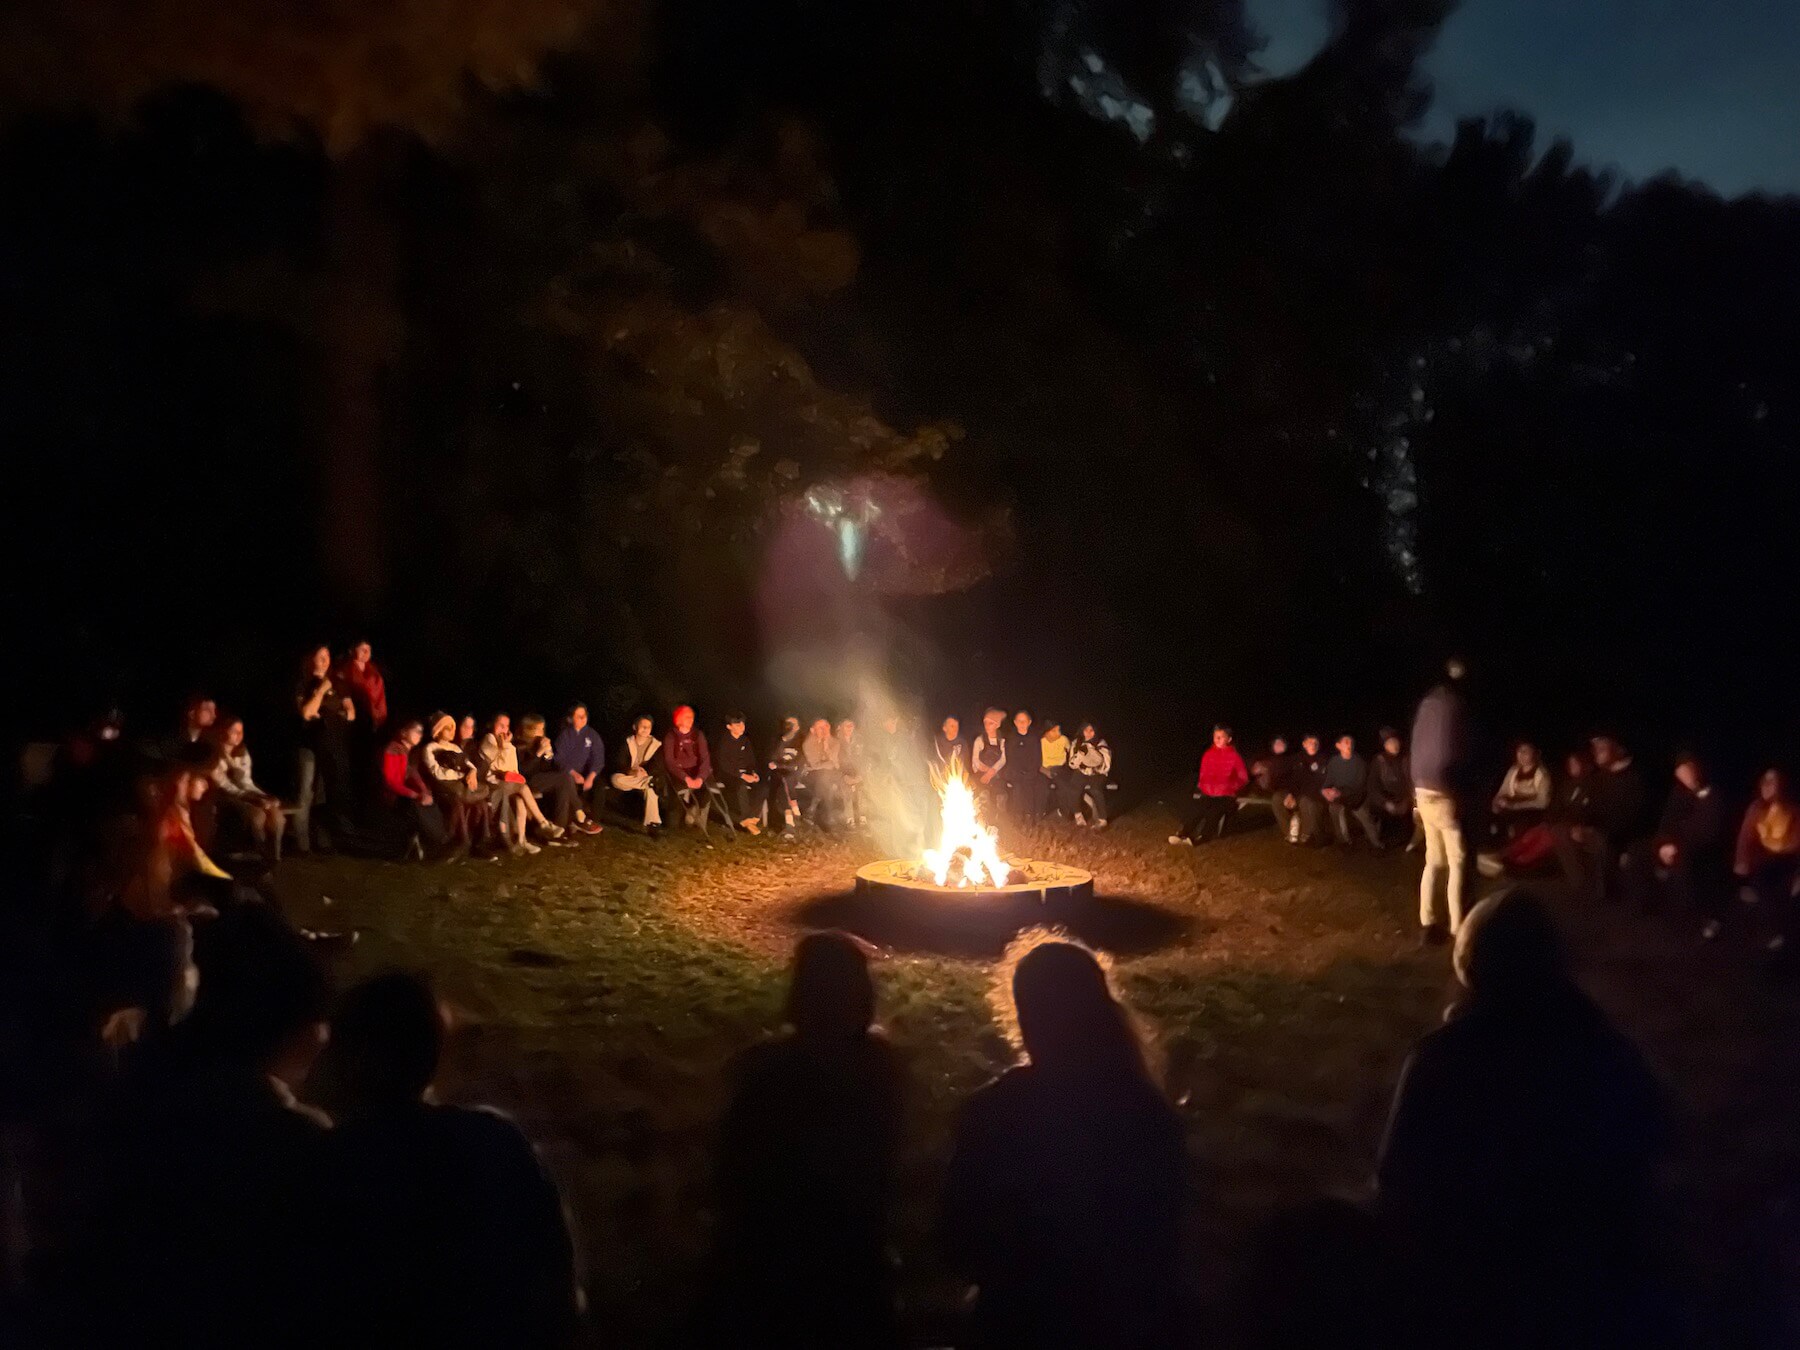 Ethical Culture students, faculty, and staff gather around a bonfire at night.